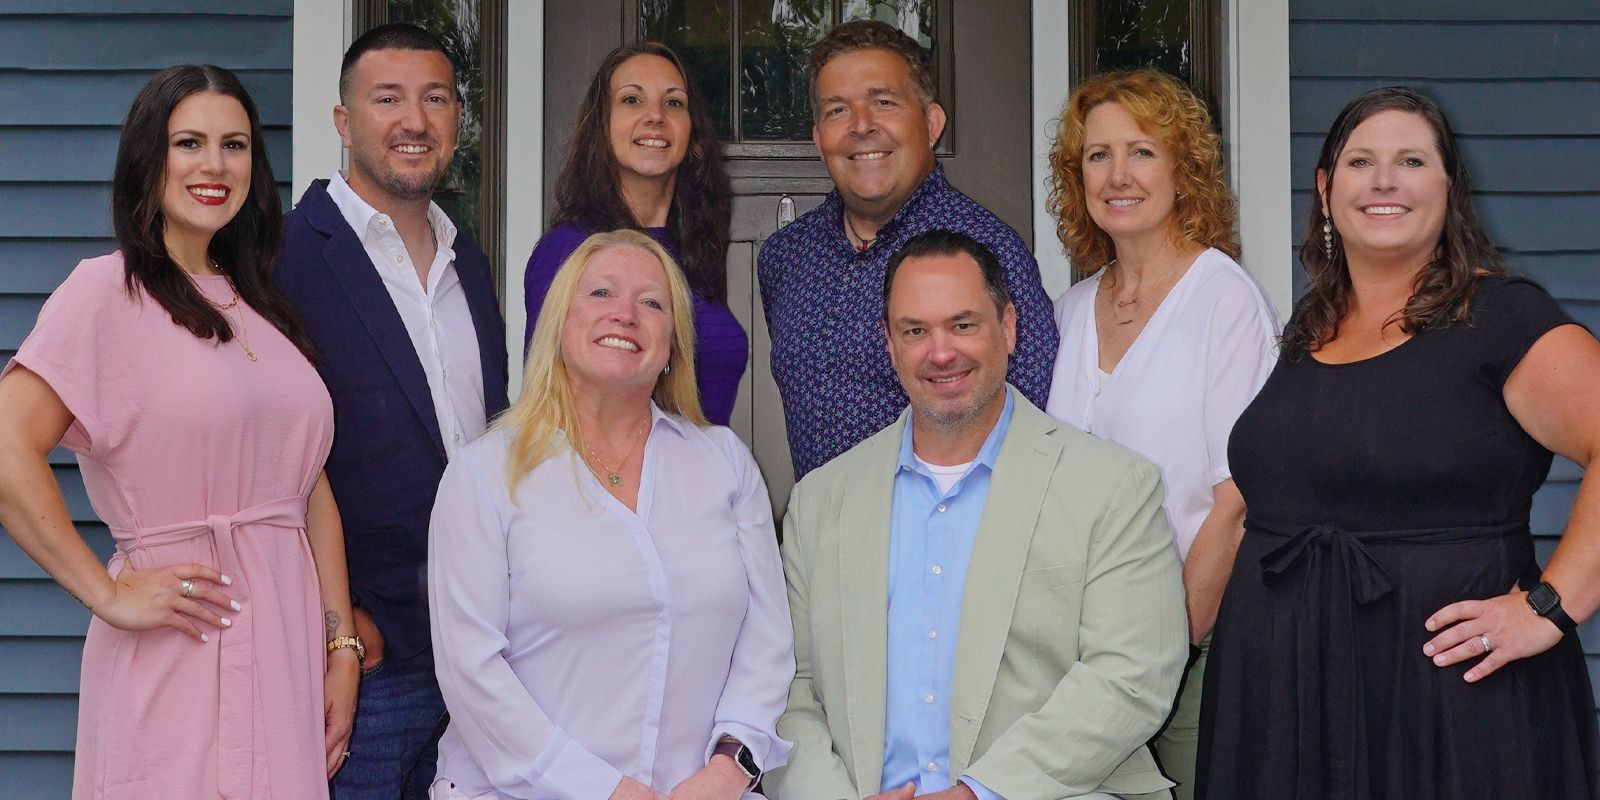 The John and Janice Real Estate Team | Keep It Local Maine